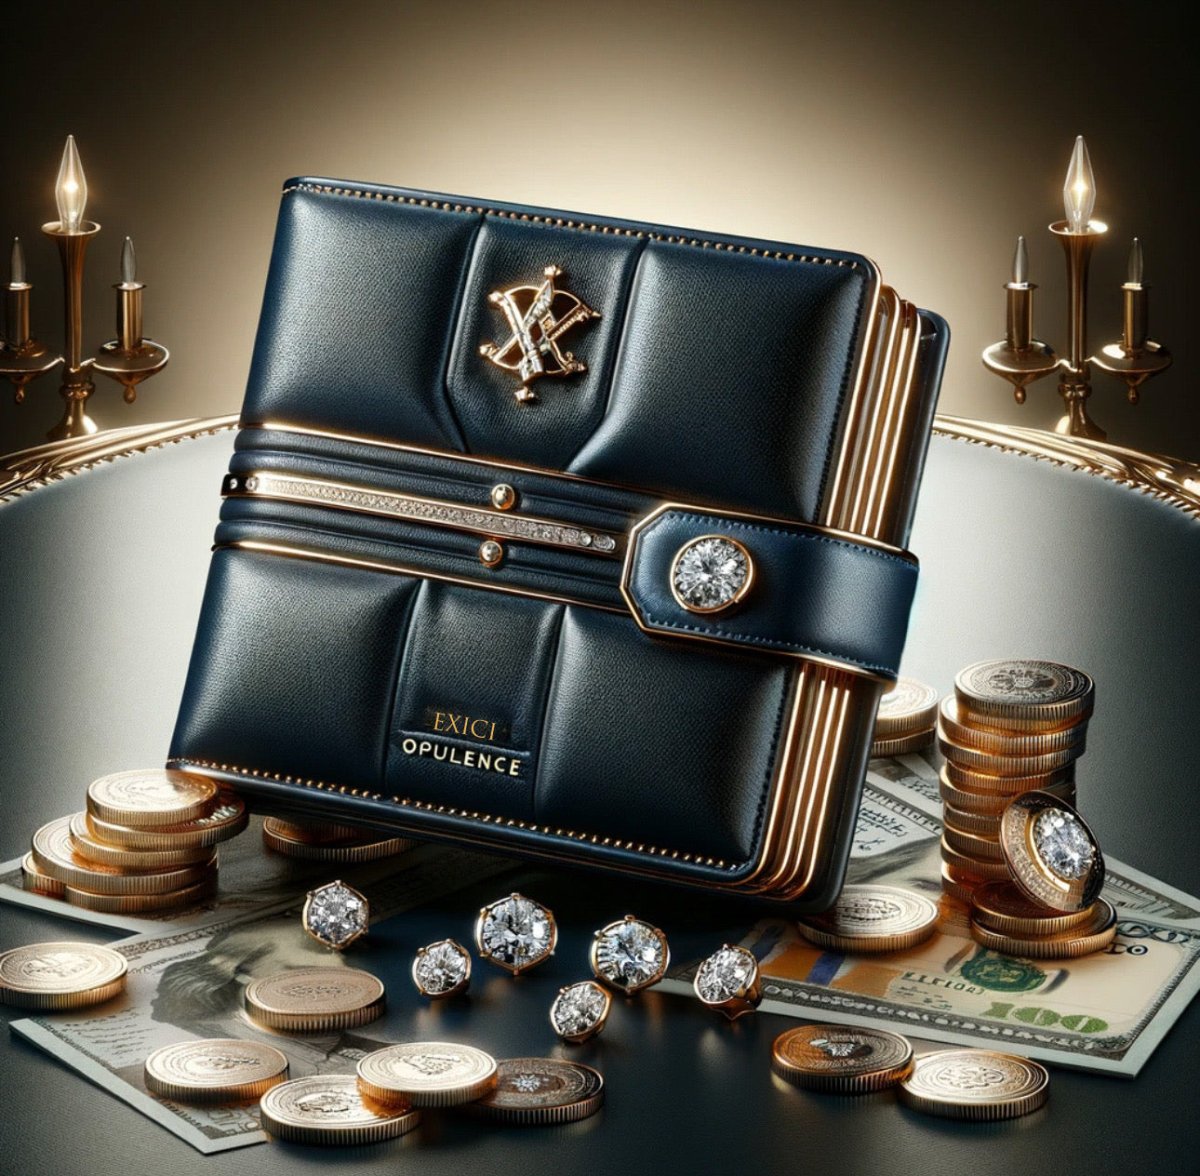 Opulence Wallet - Exici